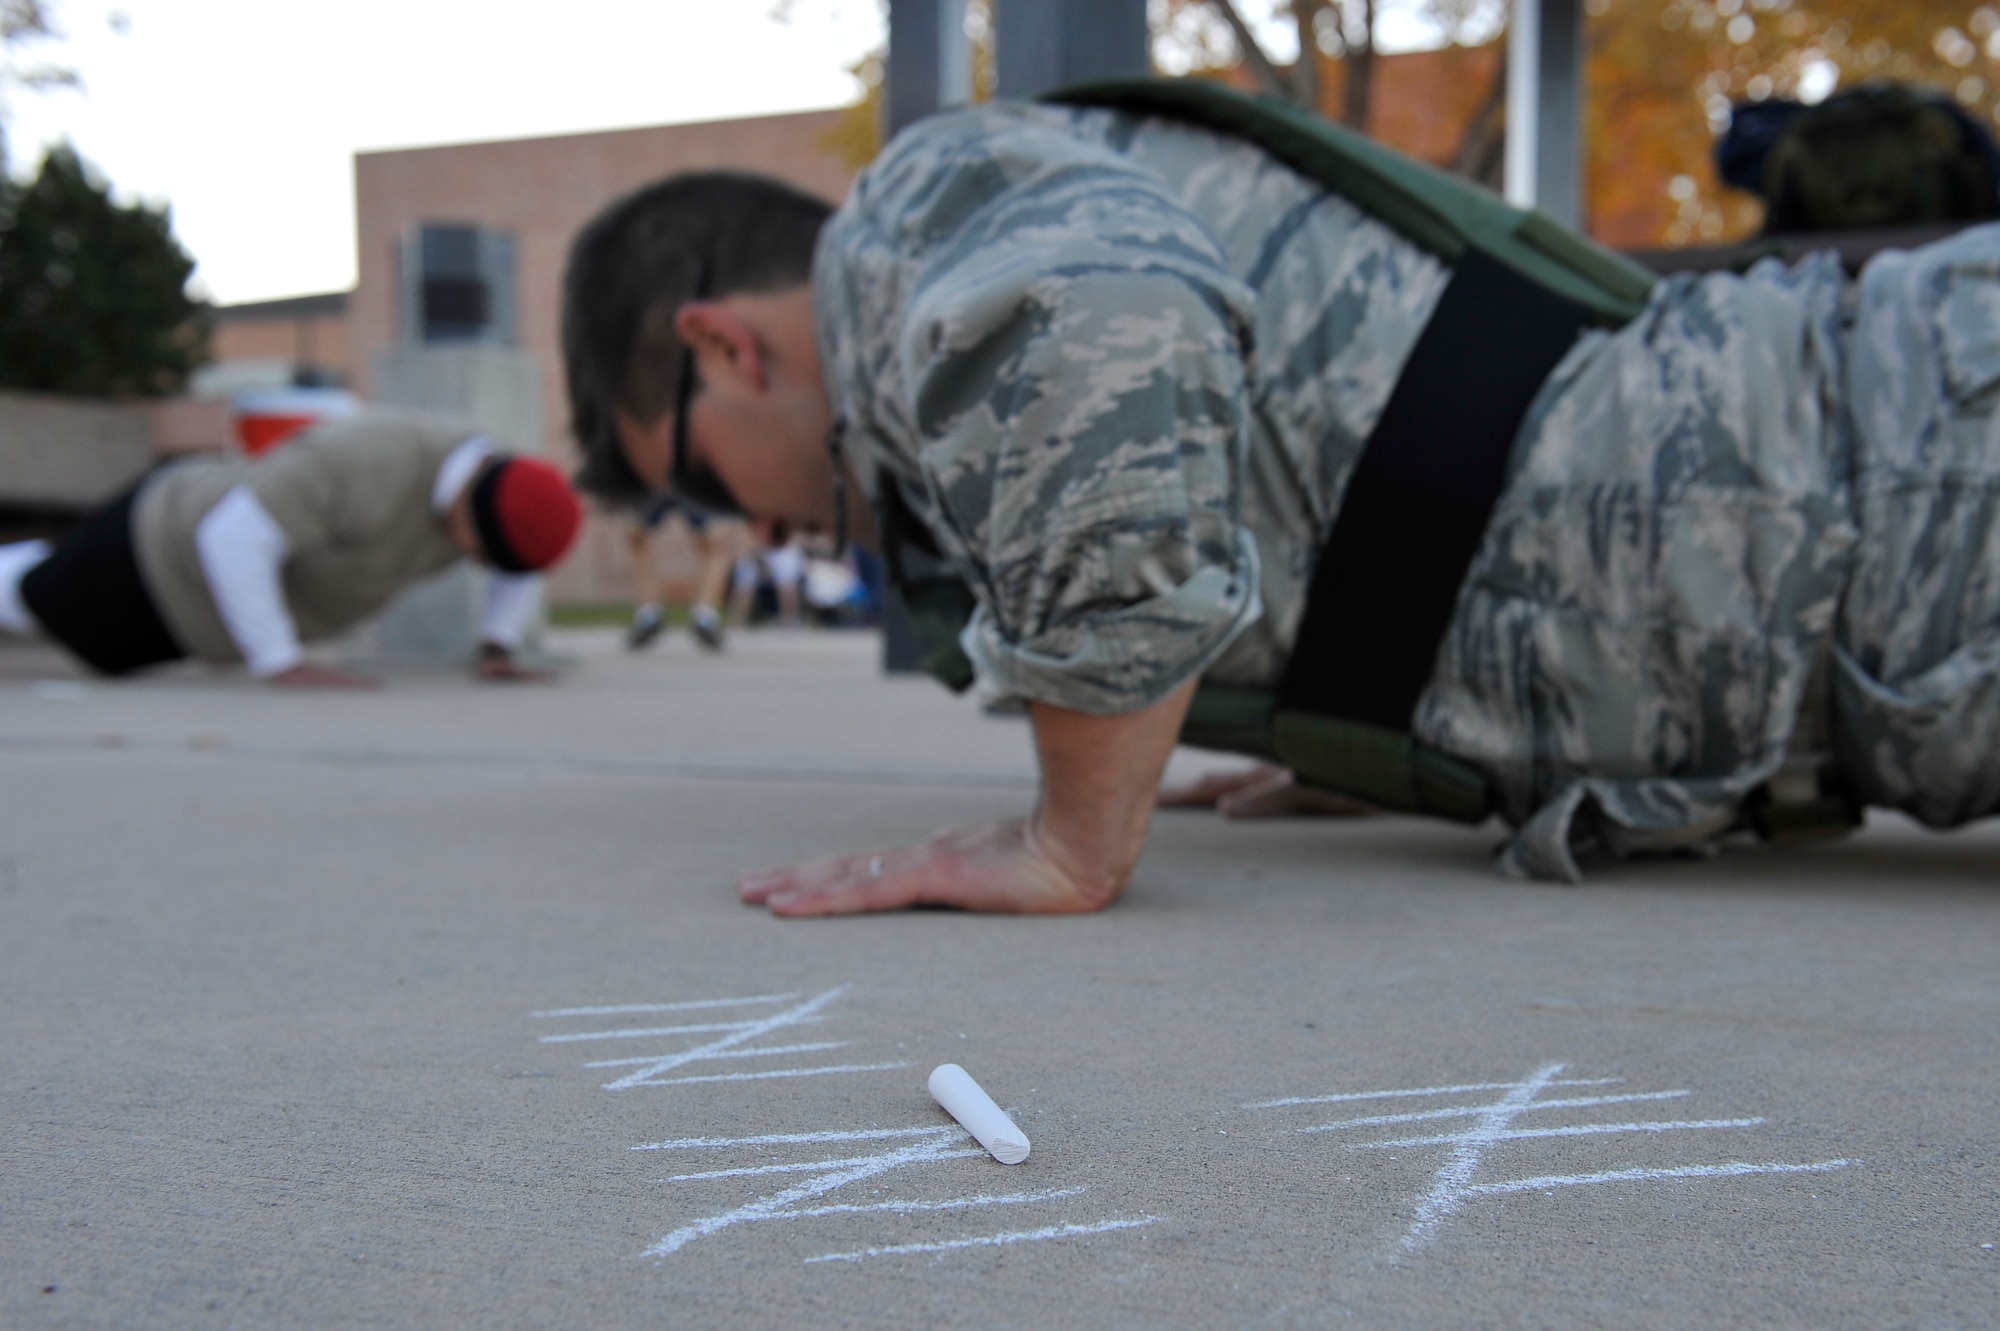 Members of Peterson Air Force Base participate in the Airman 1st Class
LeeBernard E. Chavis memorial workout Oct. 16.  The workout is an annual
event continued by Chavis' friends world-wide to commemorate his death on
Oct. 14, 2006, in the streets near Baghdad, Iraq.  Workout participants used
chalk to keep track of their repetitions during the difficult workout. (U.S.
Air Force photo by SSgt Christopher Boitz)  
